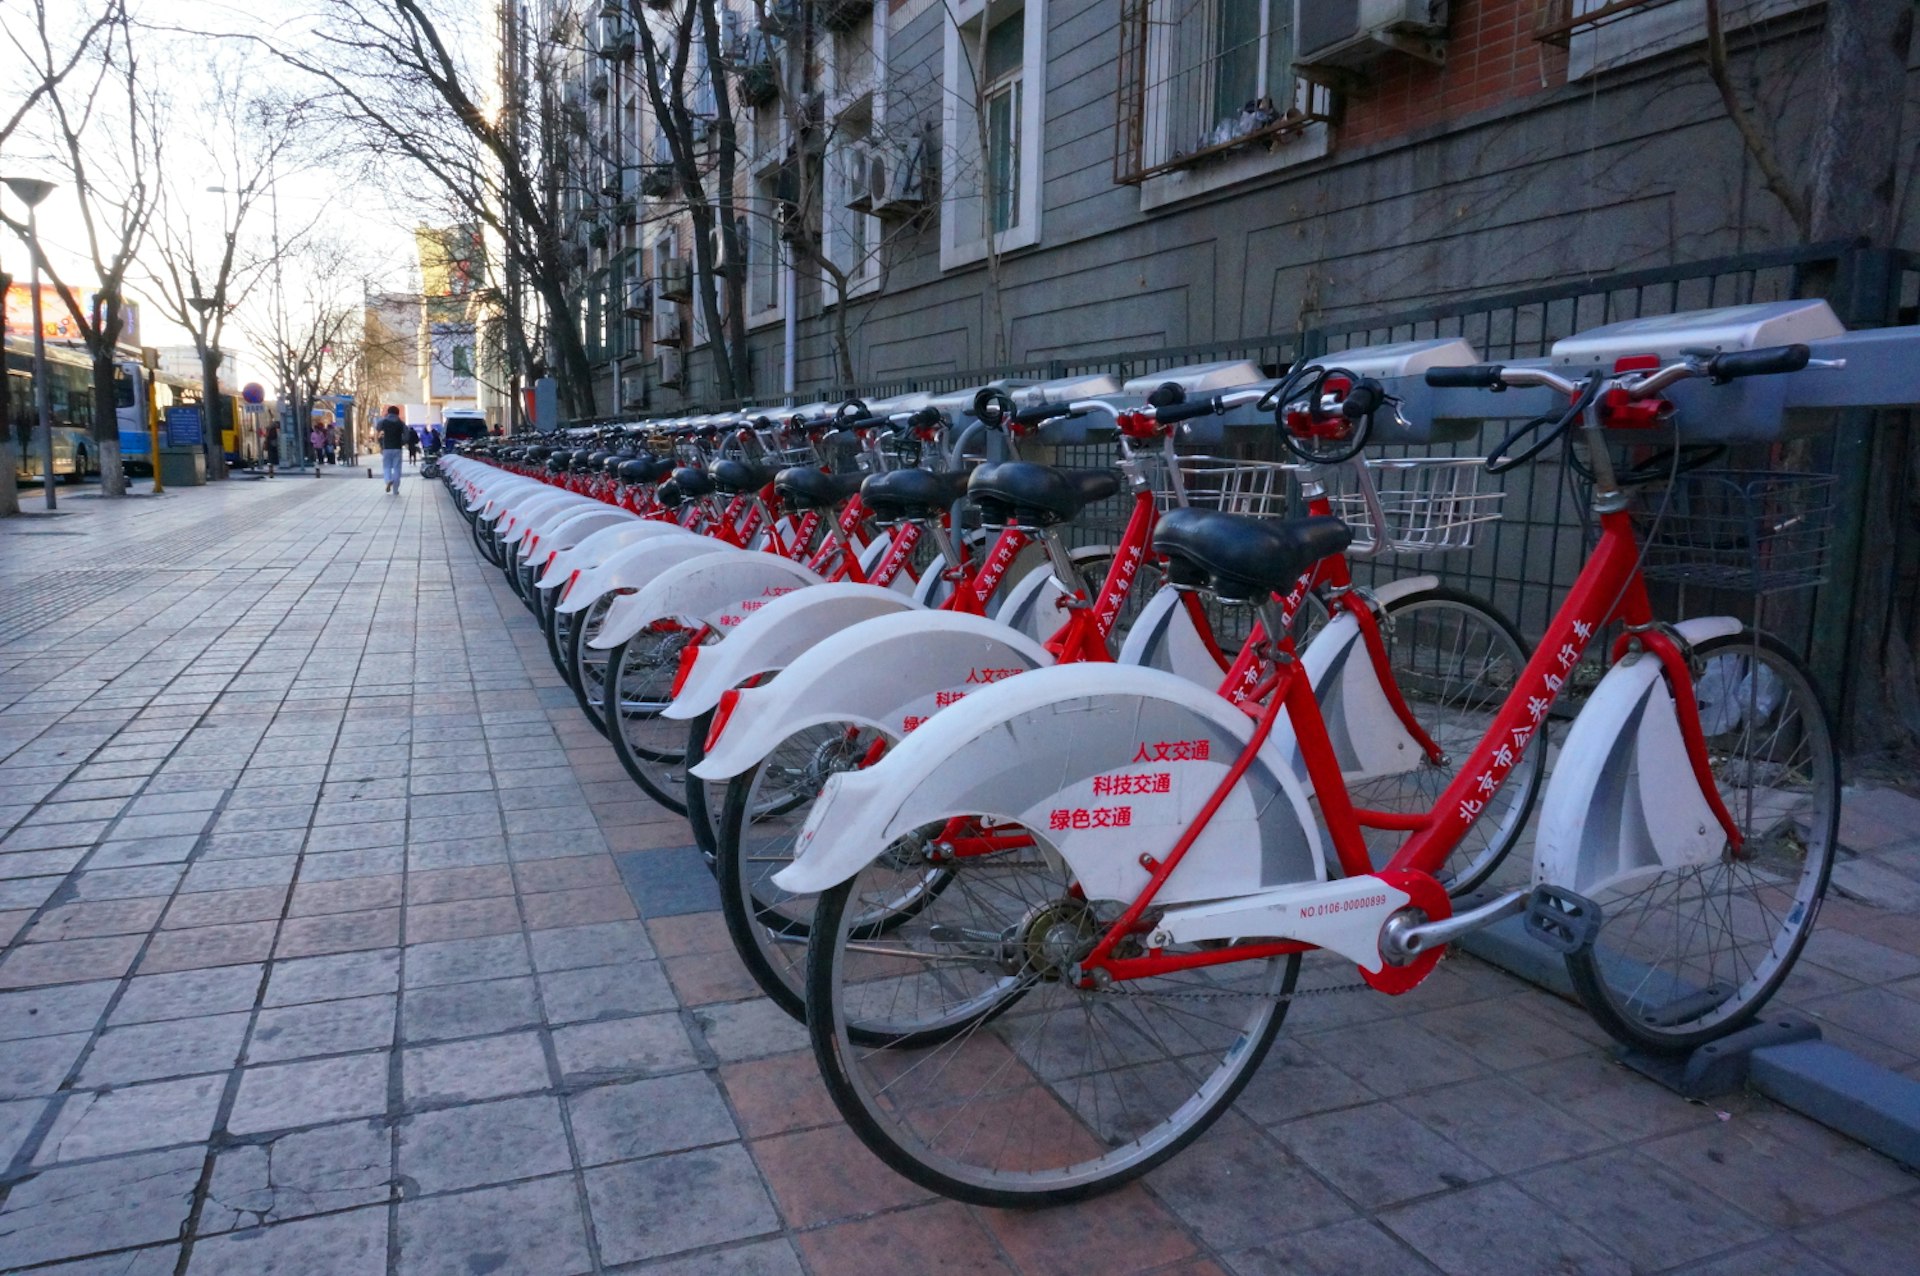 Beijing Bike Share is the city's public bicycle scheme. Image by Anita Isalska / Lonely Planet